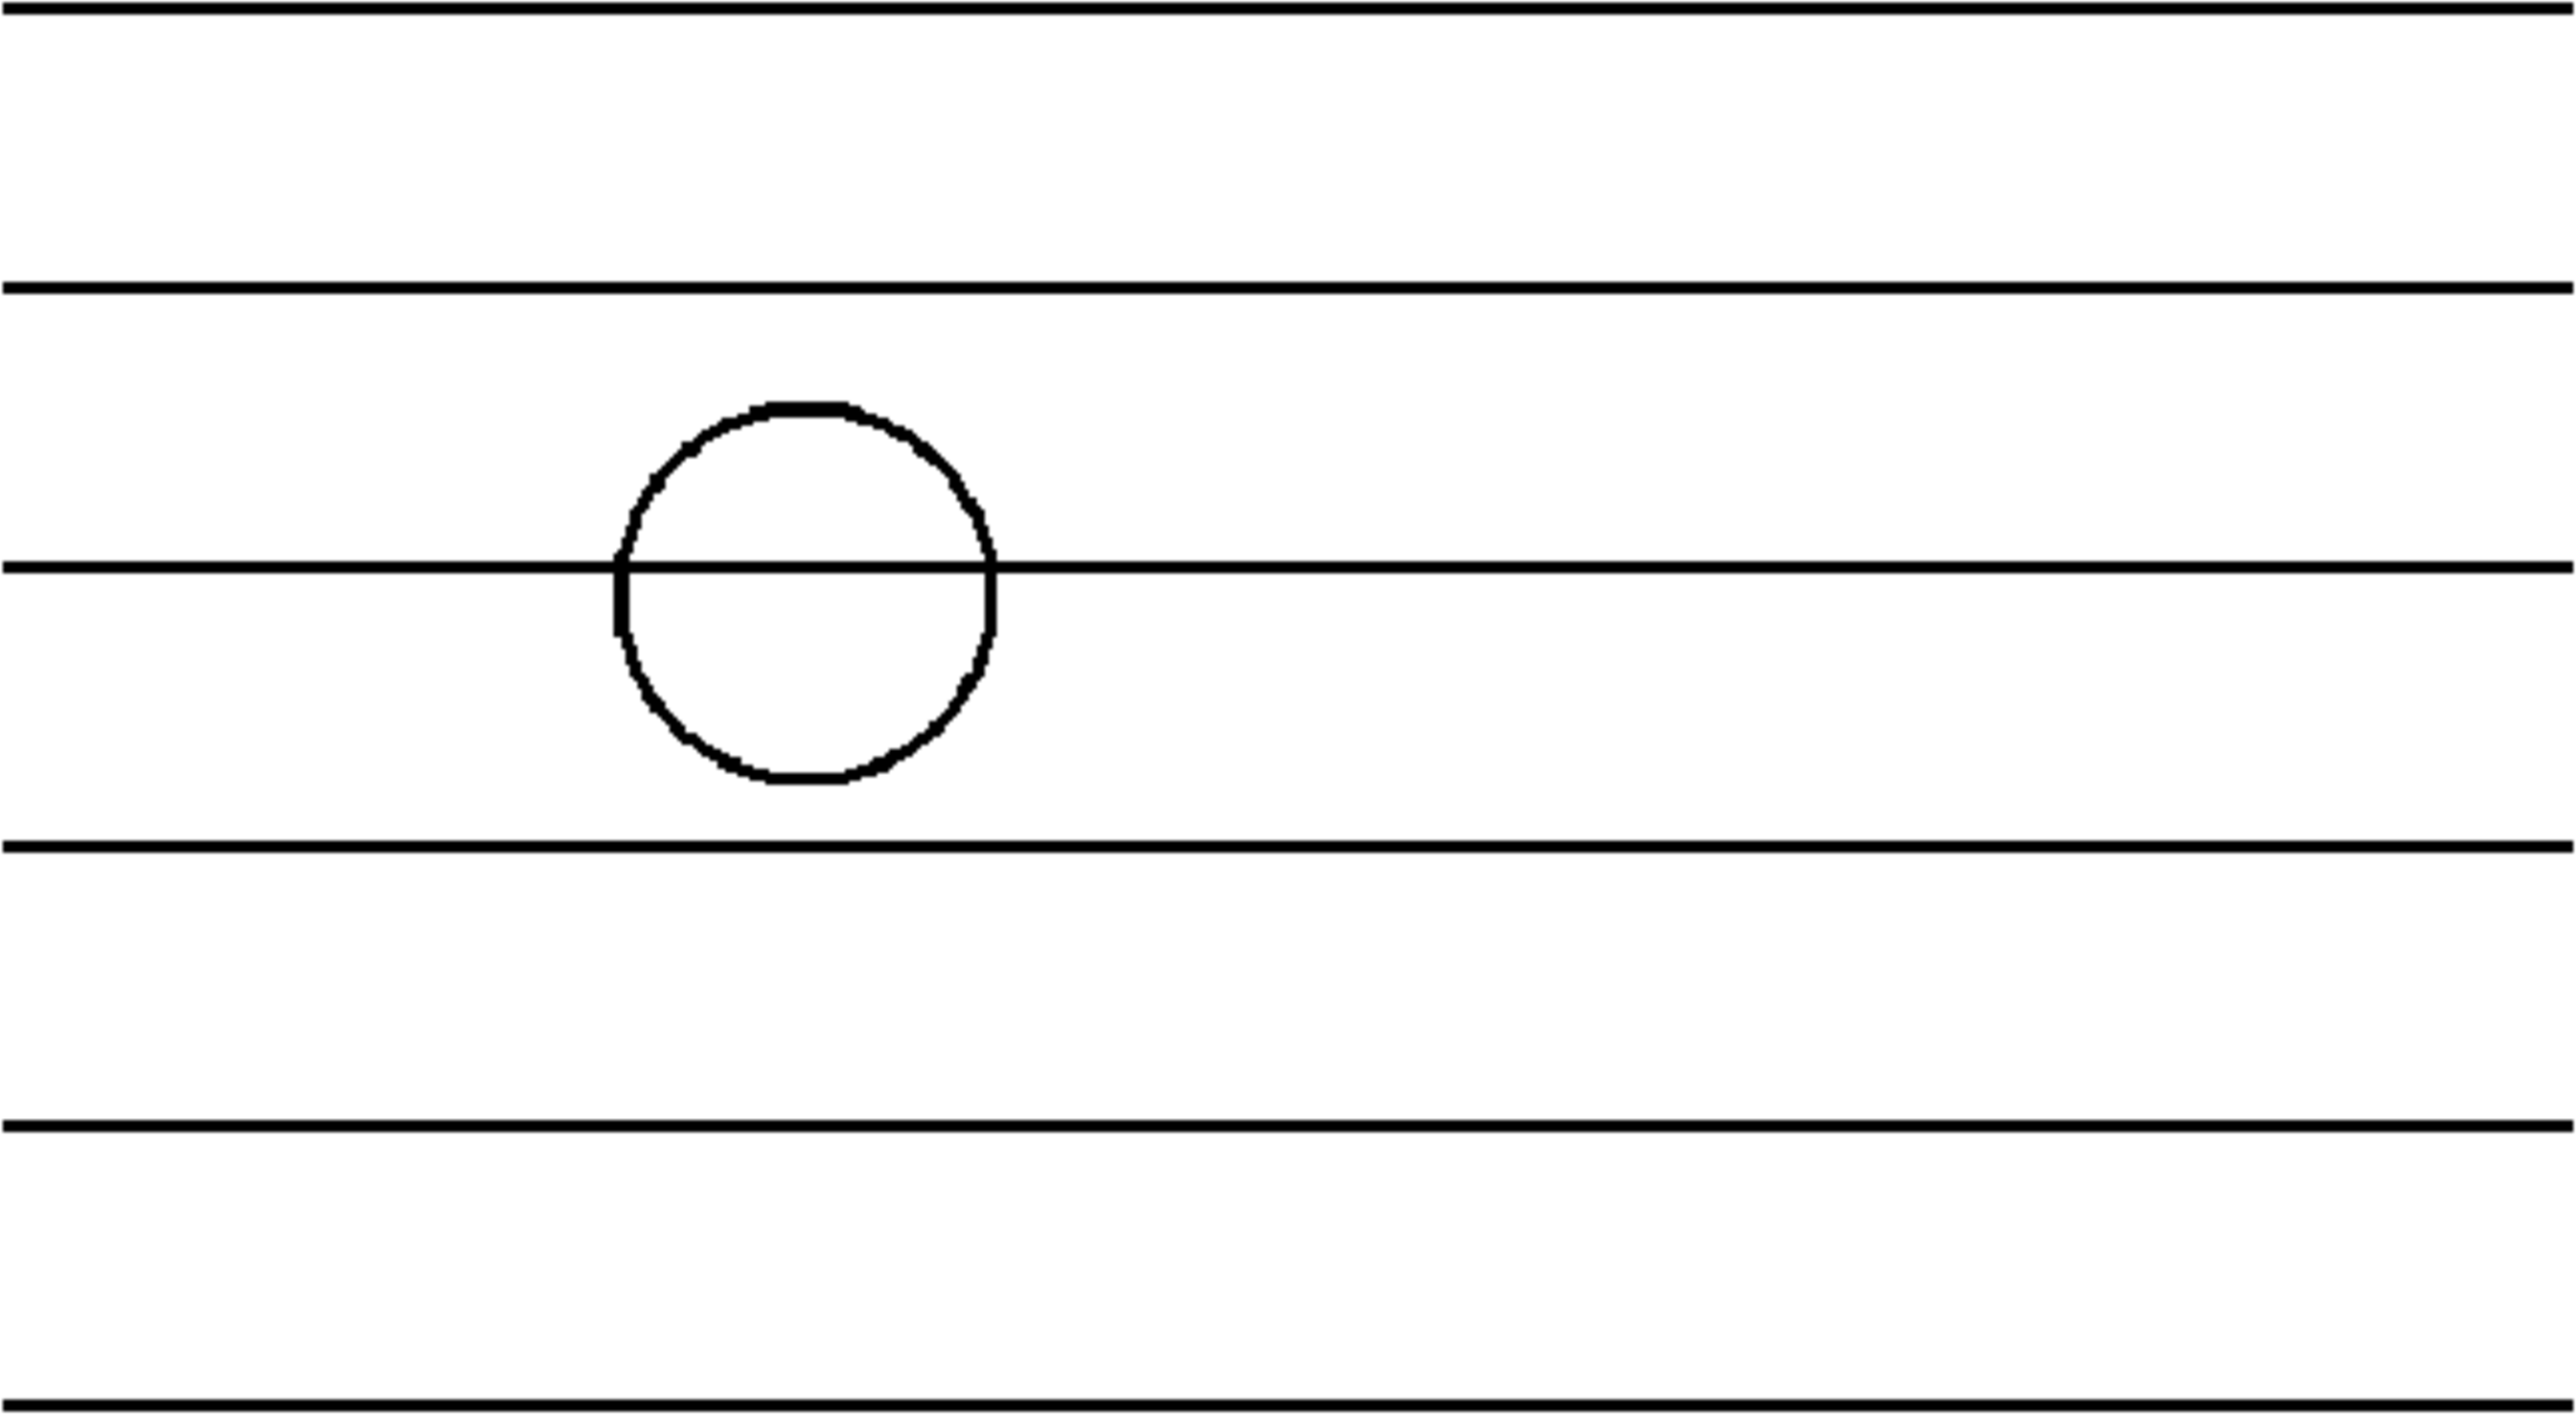 Figure 7: A circle always has two intersections.